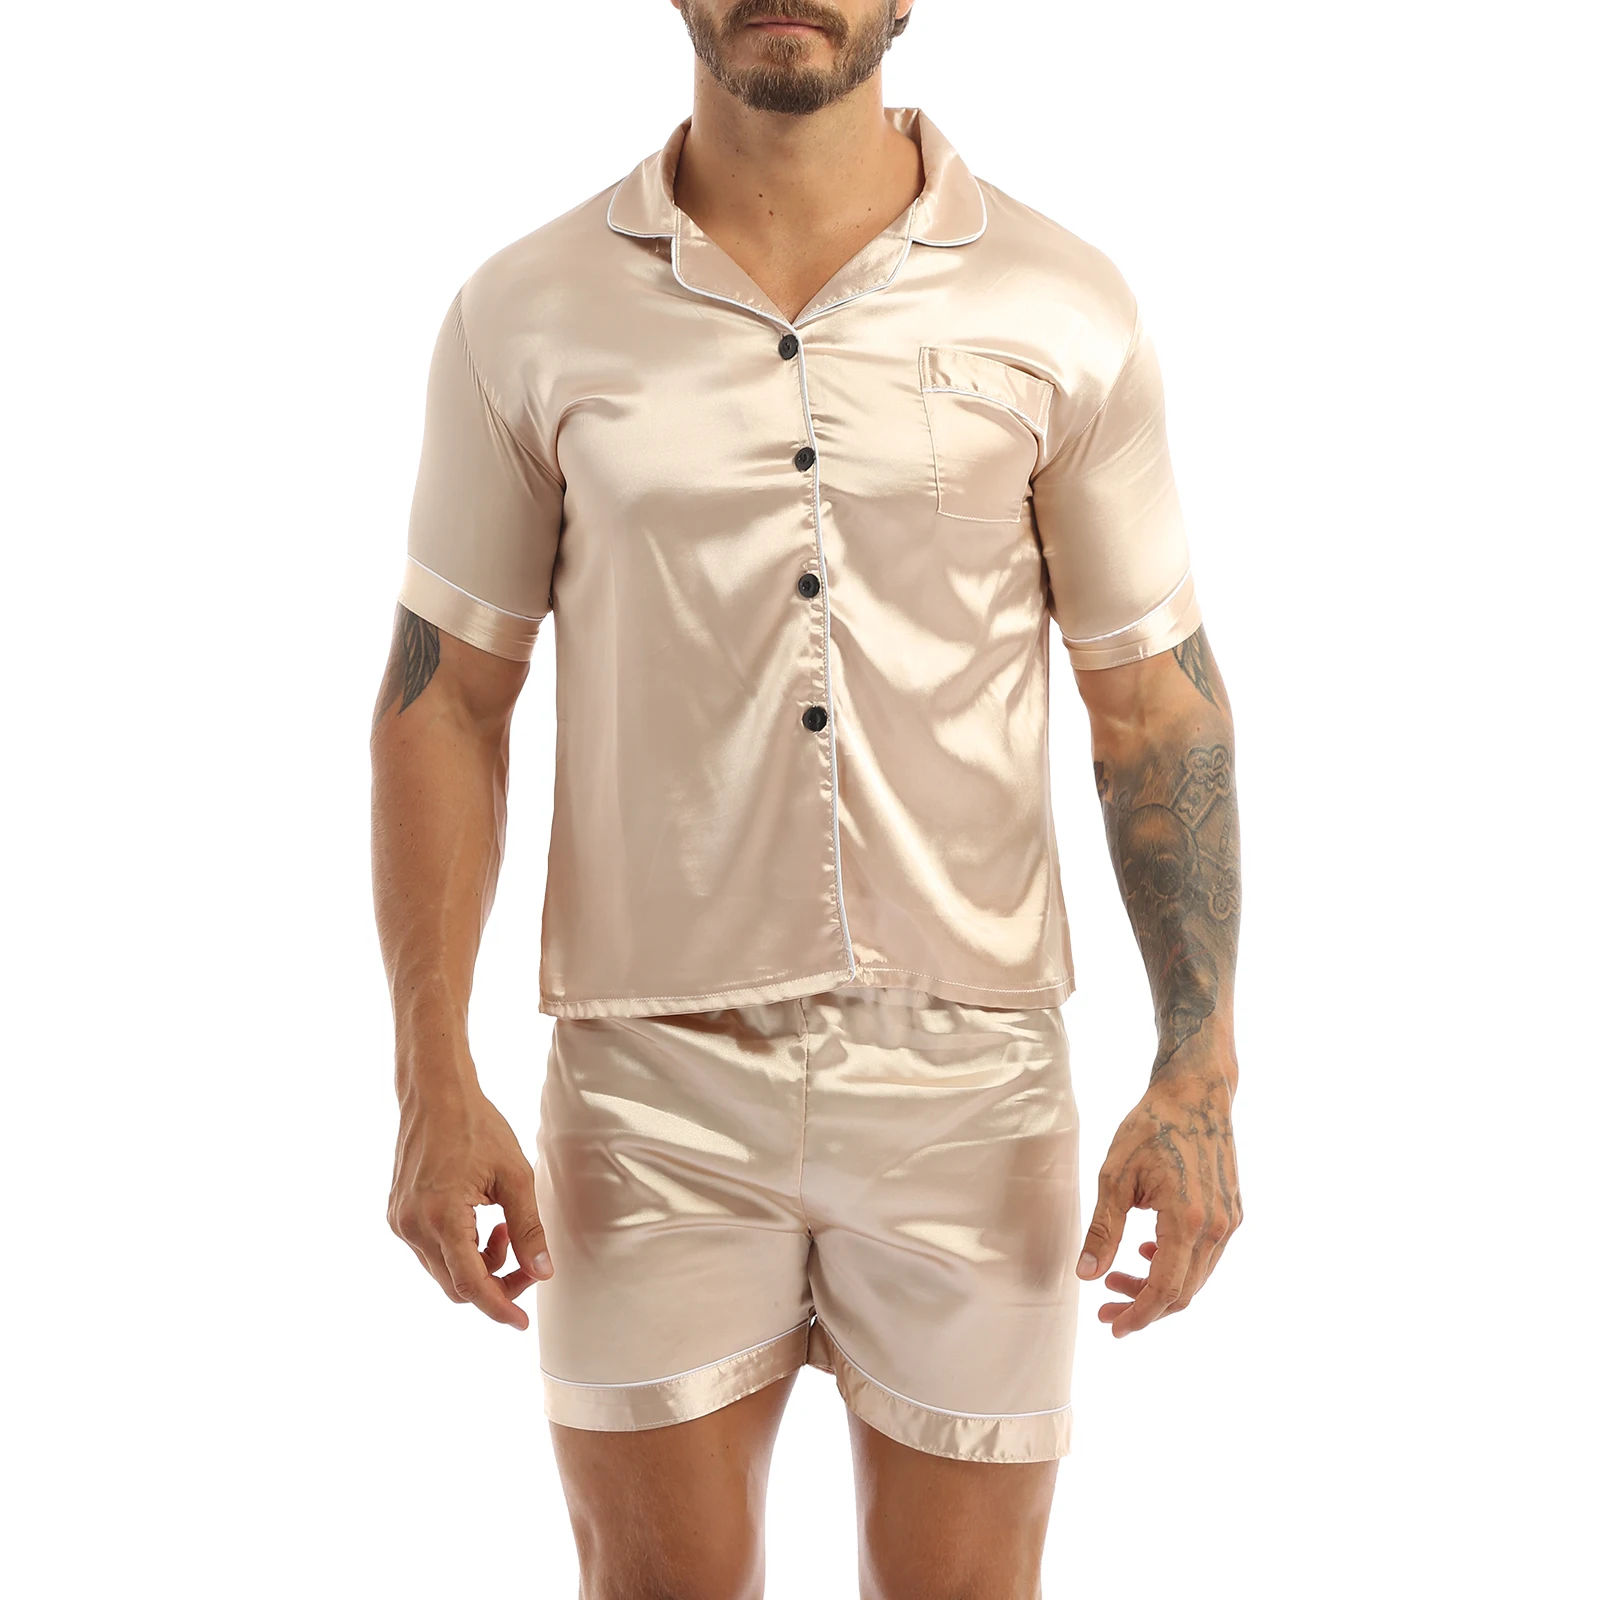 Fashion Mens Silky Satin Pajamas Set Solid Color Short Sleeves Button T-Shirt Tops with Elastic Waistband Boxer Shorts Sleepwear mens pjs sale